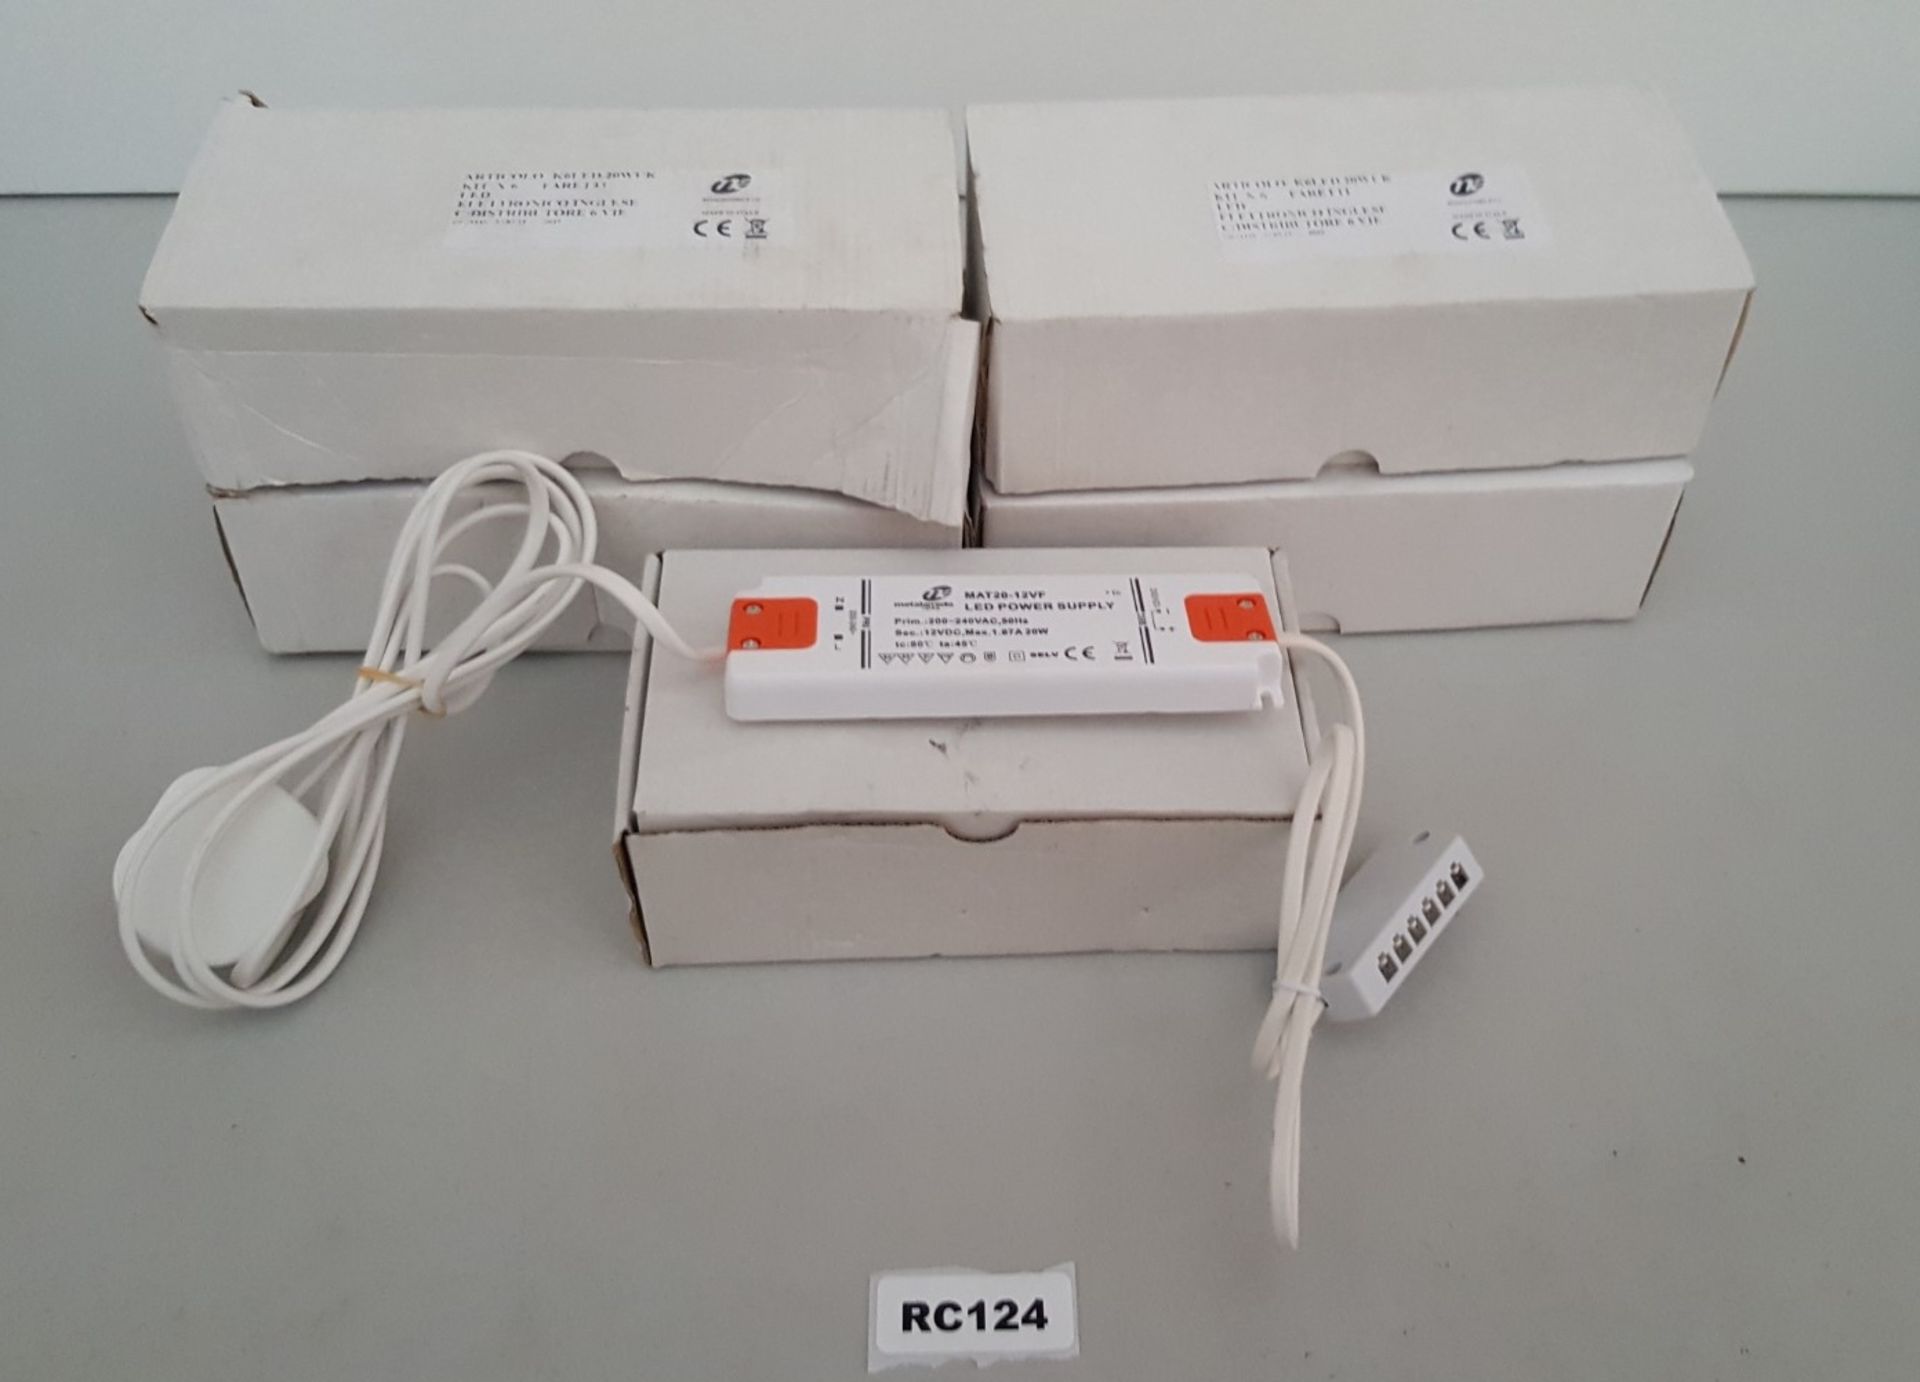 6 x LED DRIVER POWER SUPPLY 240V - 12V DC WITH 6 PORT AMP BLOCK - Ref RC124 - CL011 - Location: Altr